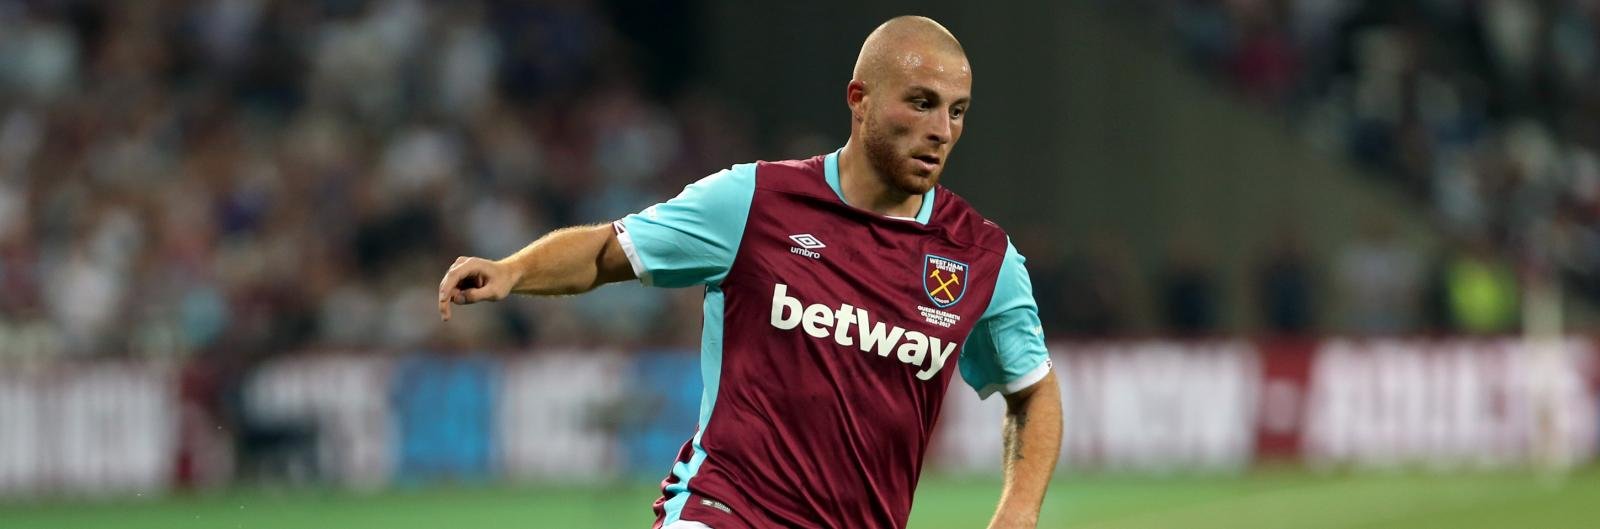 West Ham United want rid of £400,000-a-game flop